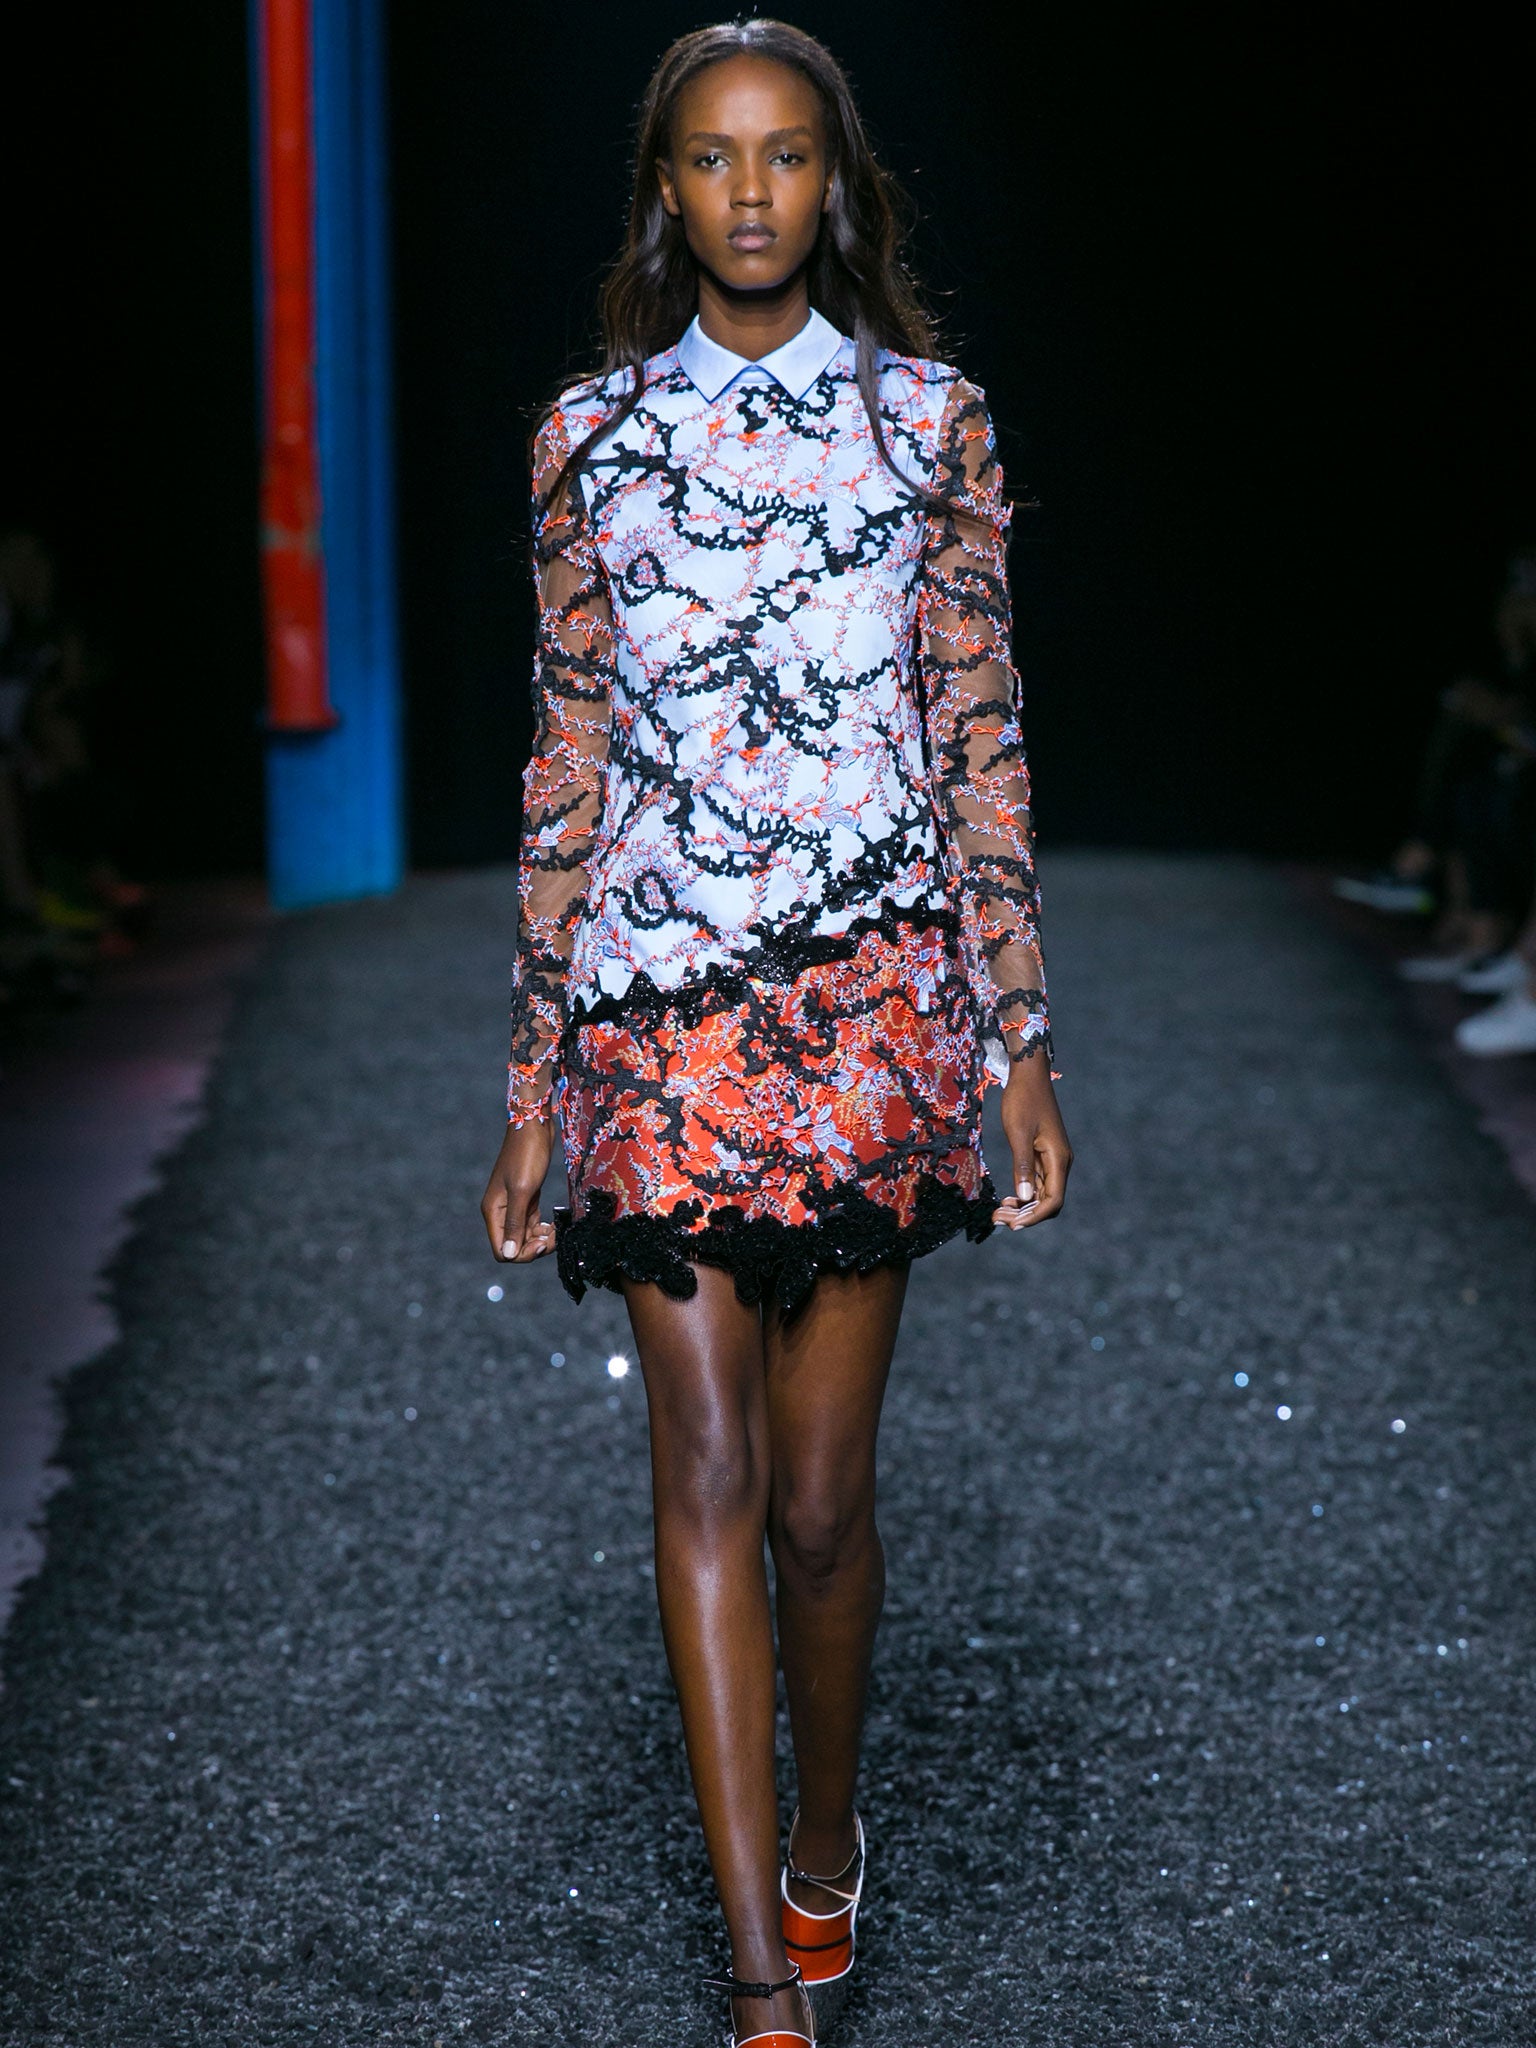 Printed seaweed and deluxe barnacles: How the fashion world is